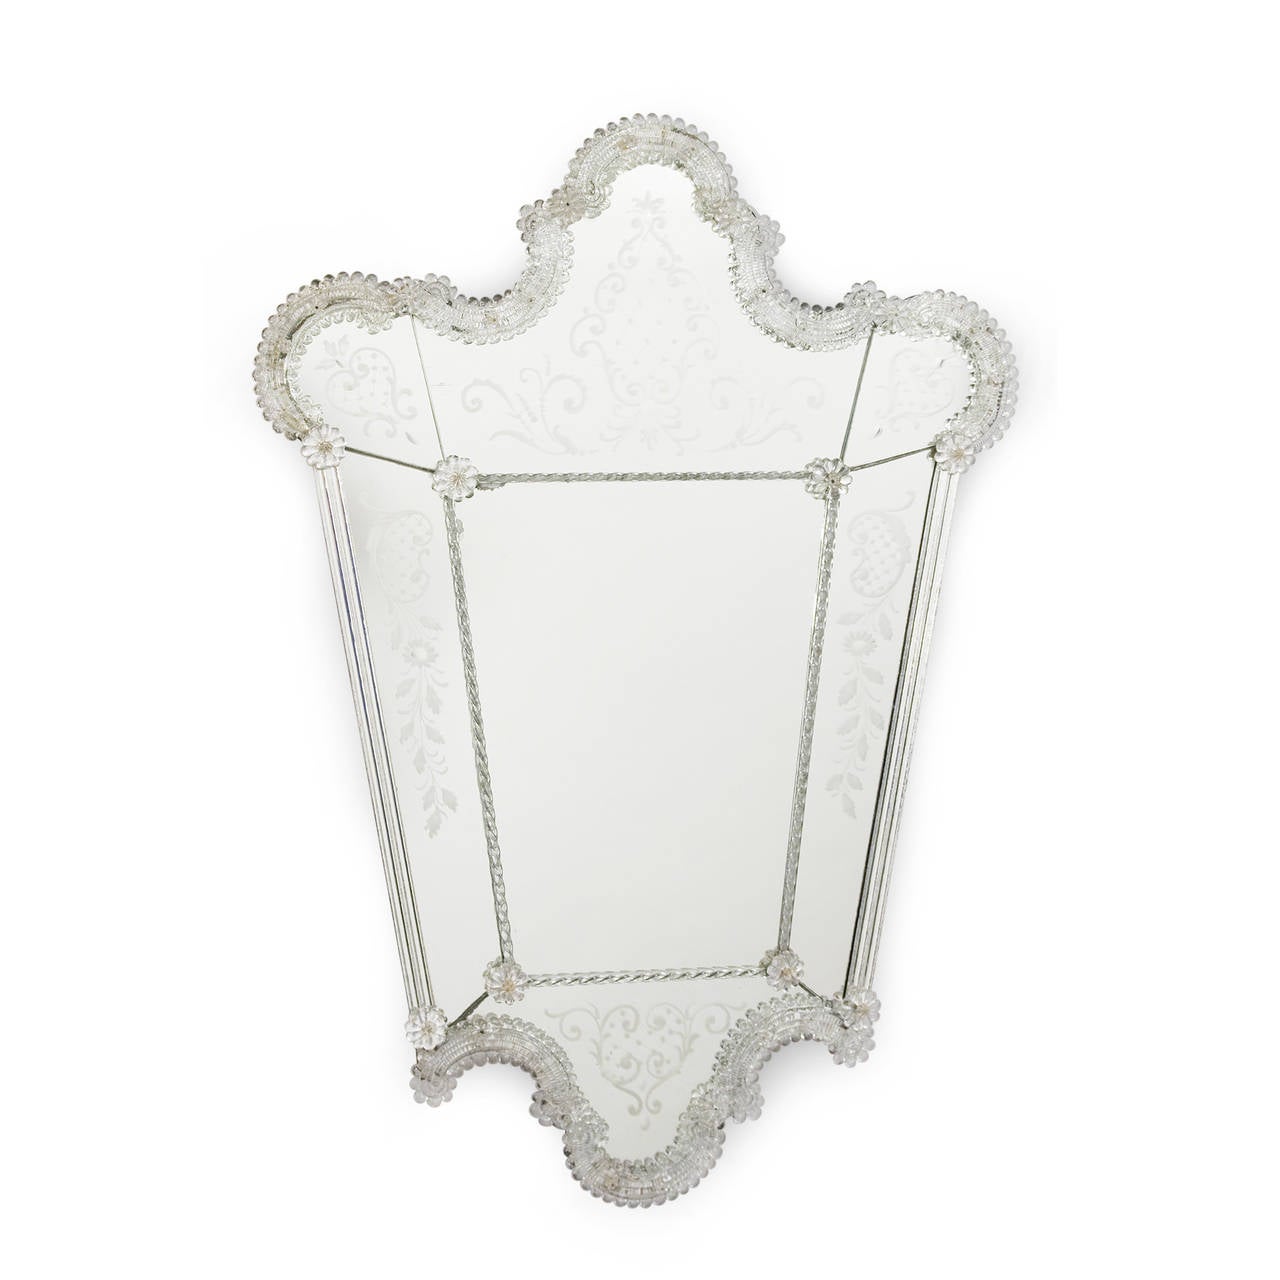 Clear and silvered glass frame mirror, with glass florets applied to braided rope form frame, outer panels etched with foliate decoration, central panel having smaller rope border and florets at each corner, the overall shape an V-Form with rounded